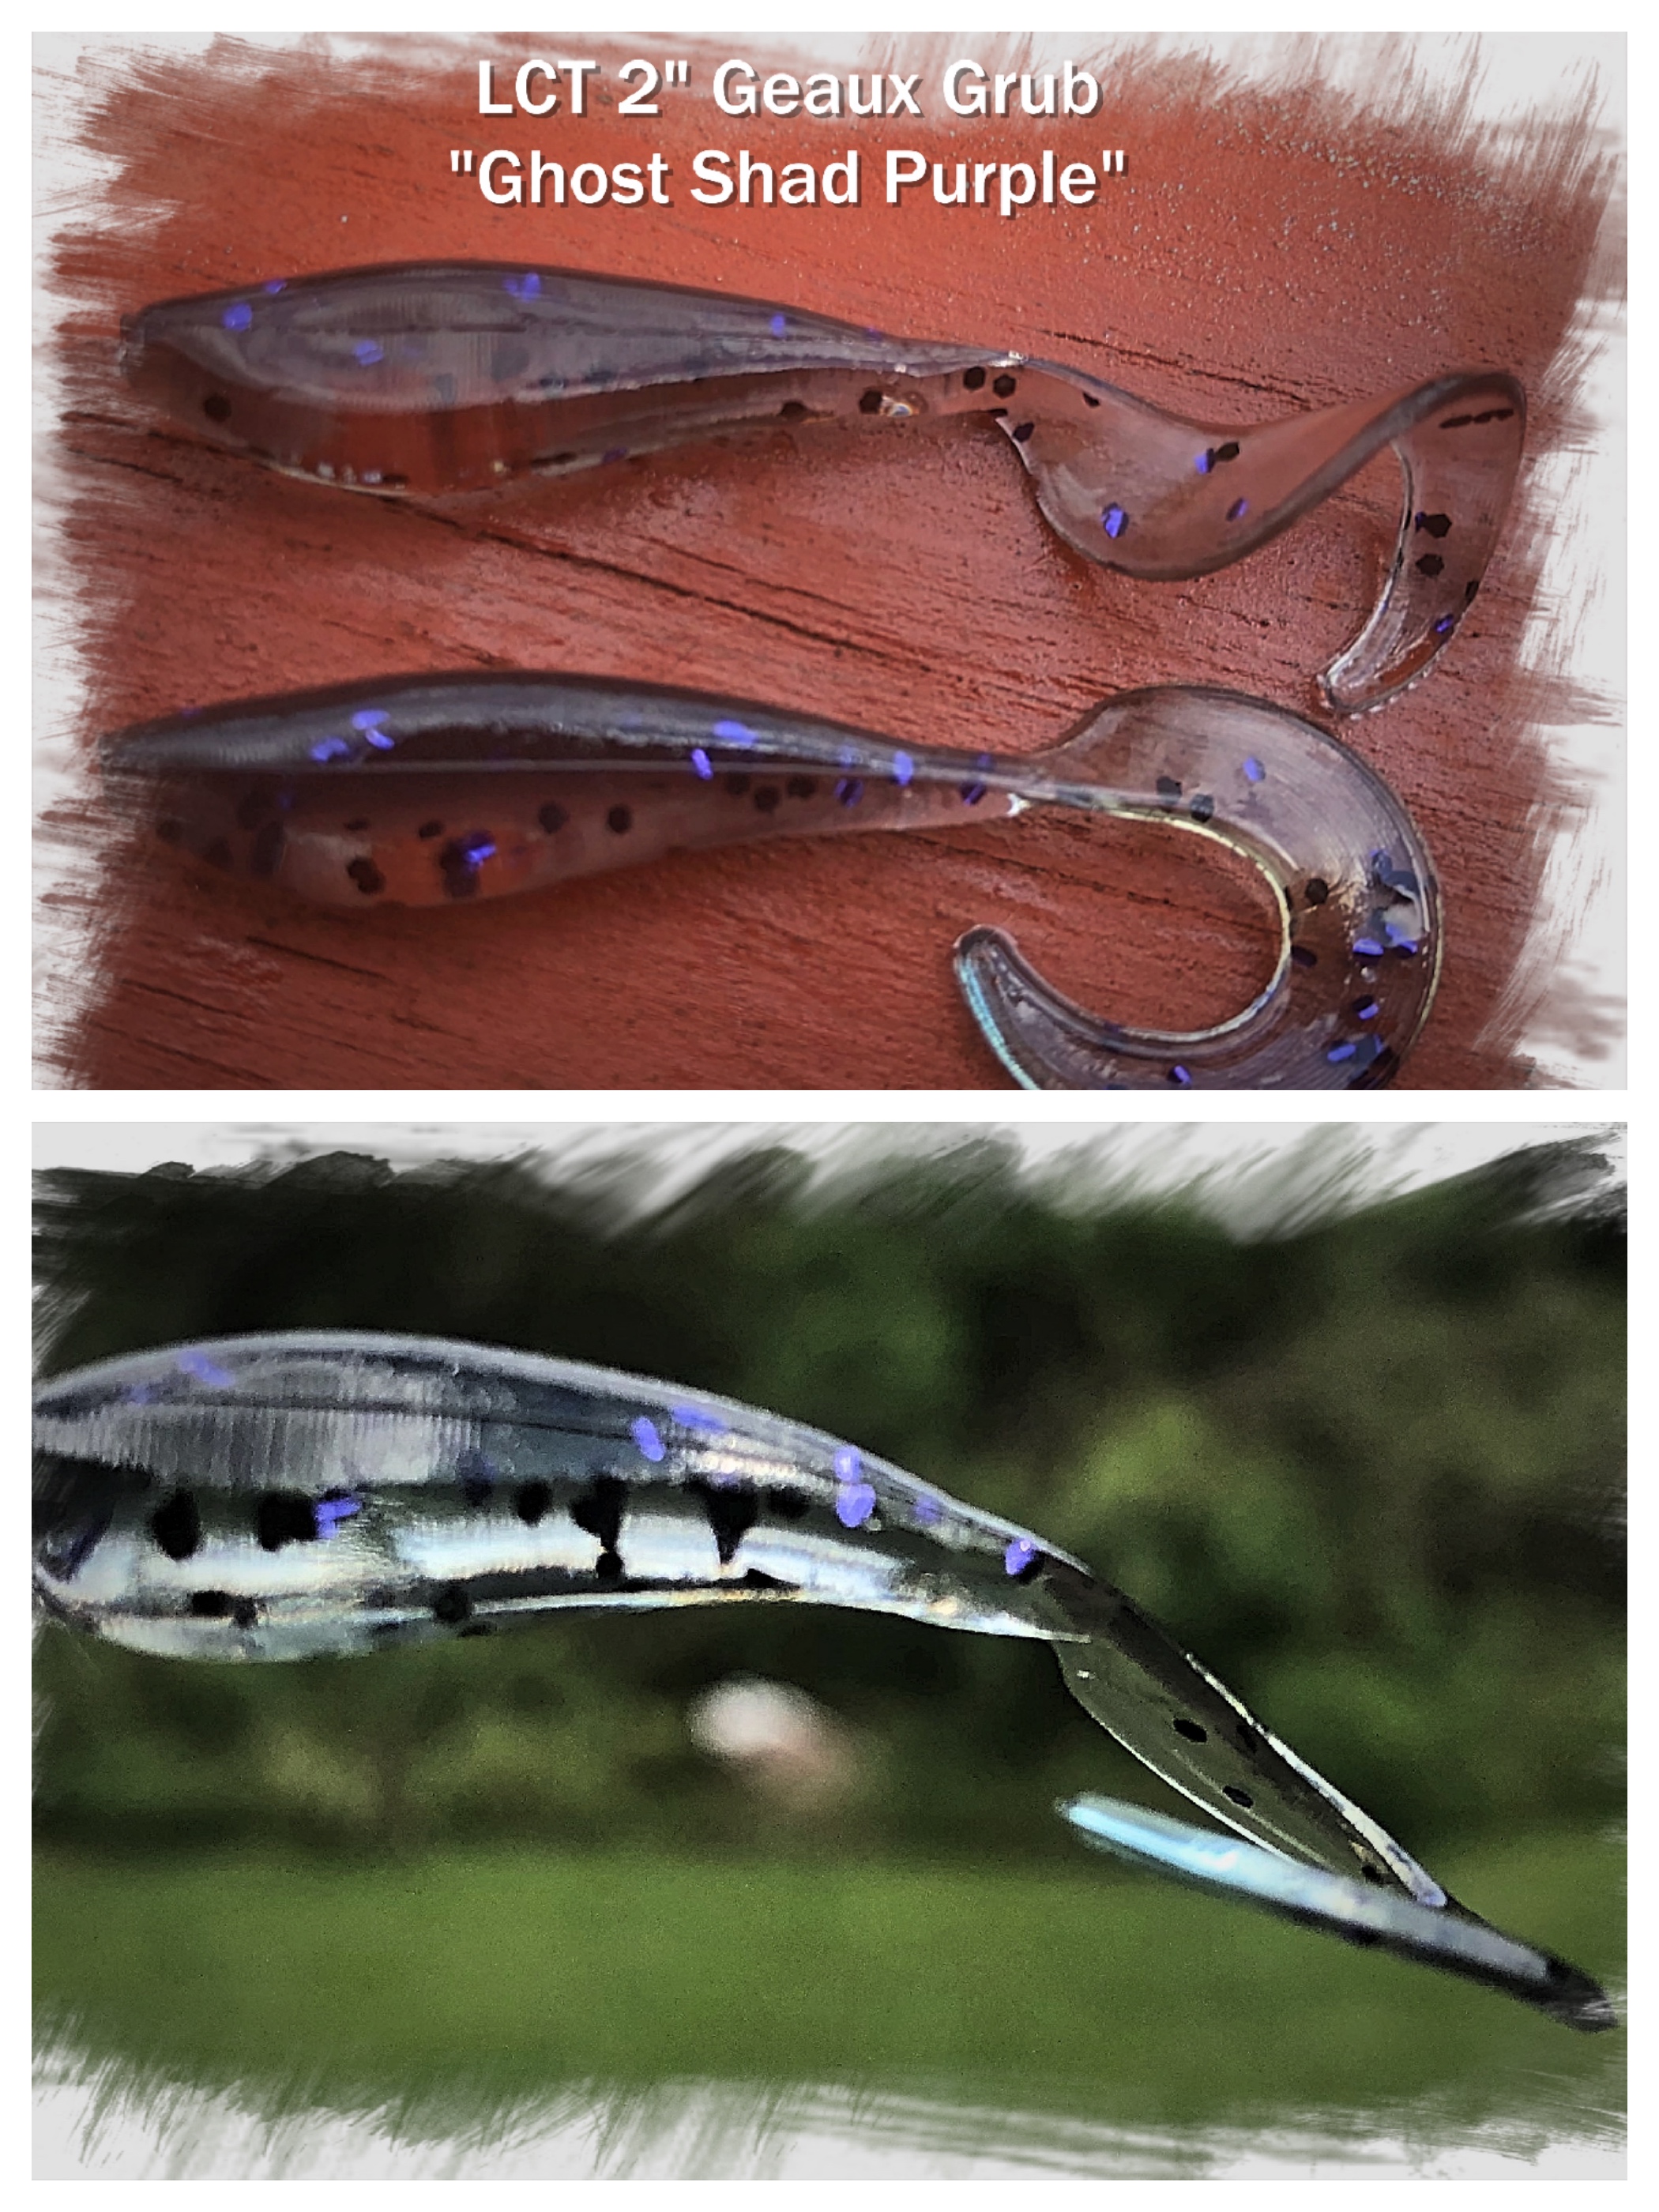 https://legacycustomtackle.com/wp-content/uploads/2019/09/LCT-2inch-Geaux-Grub-Ghost-Shad-Purple-PROD-PIC.jpg